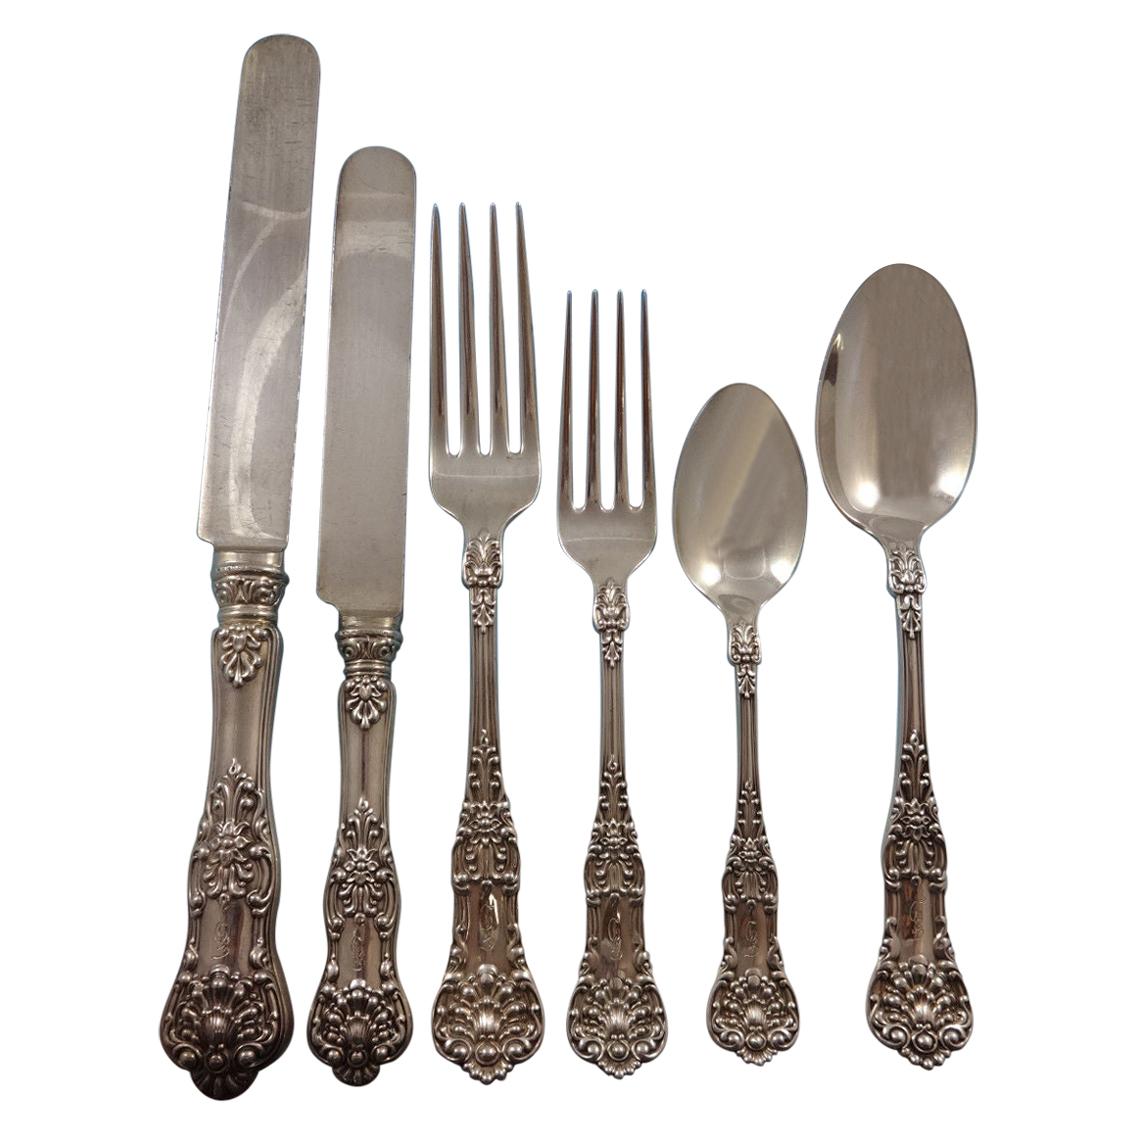 New King by Dominick & Haff Sterling Silver Flatware Set 12 Service 80 Pieces